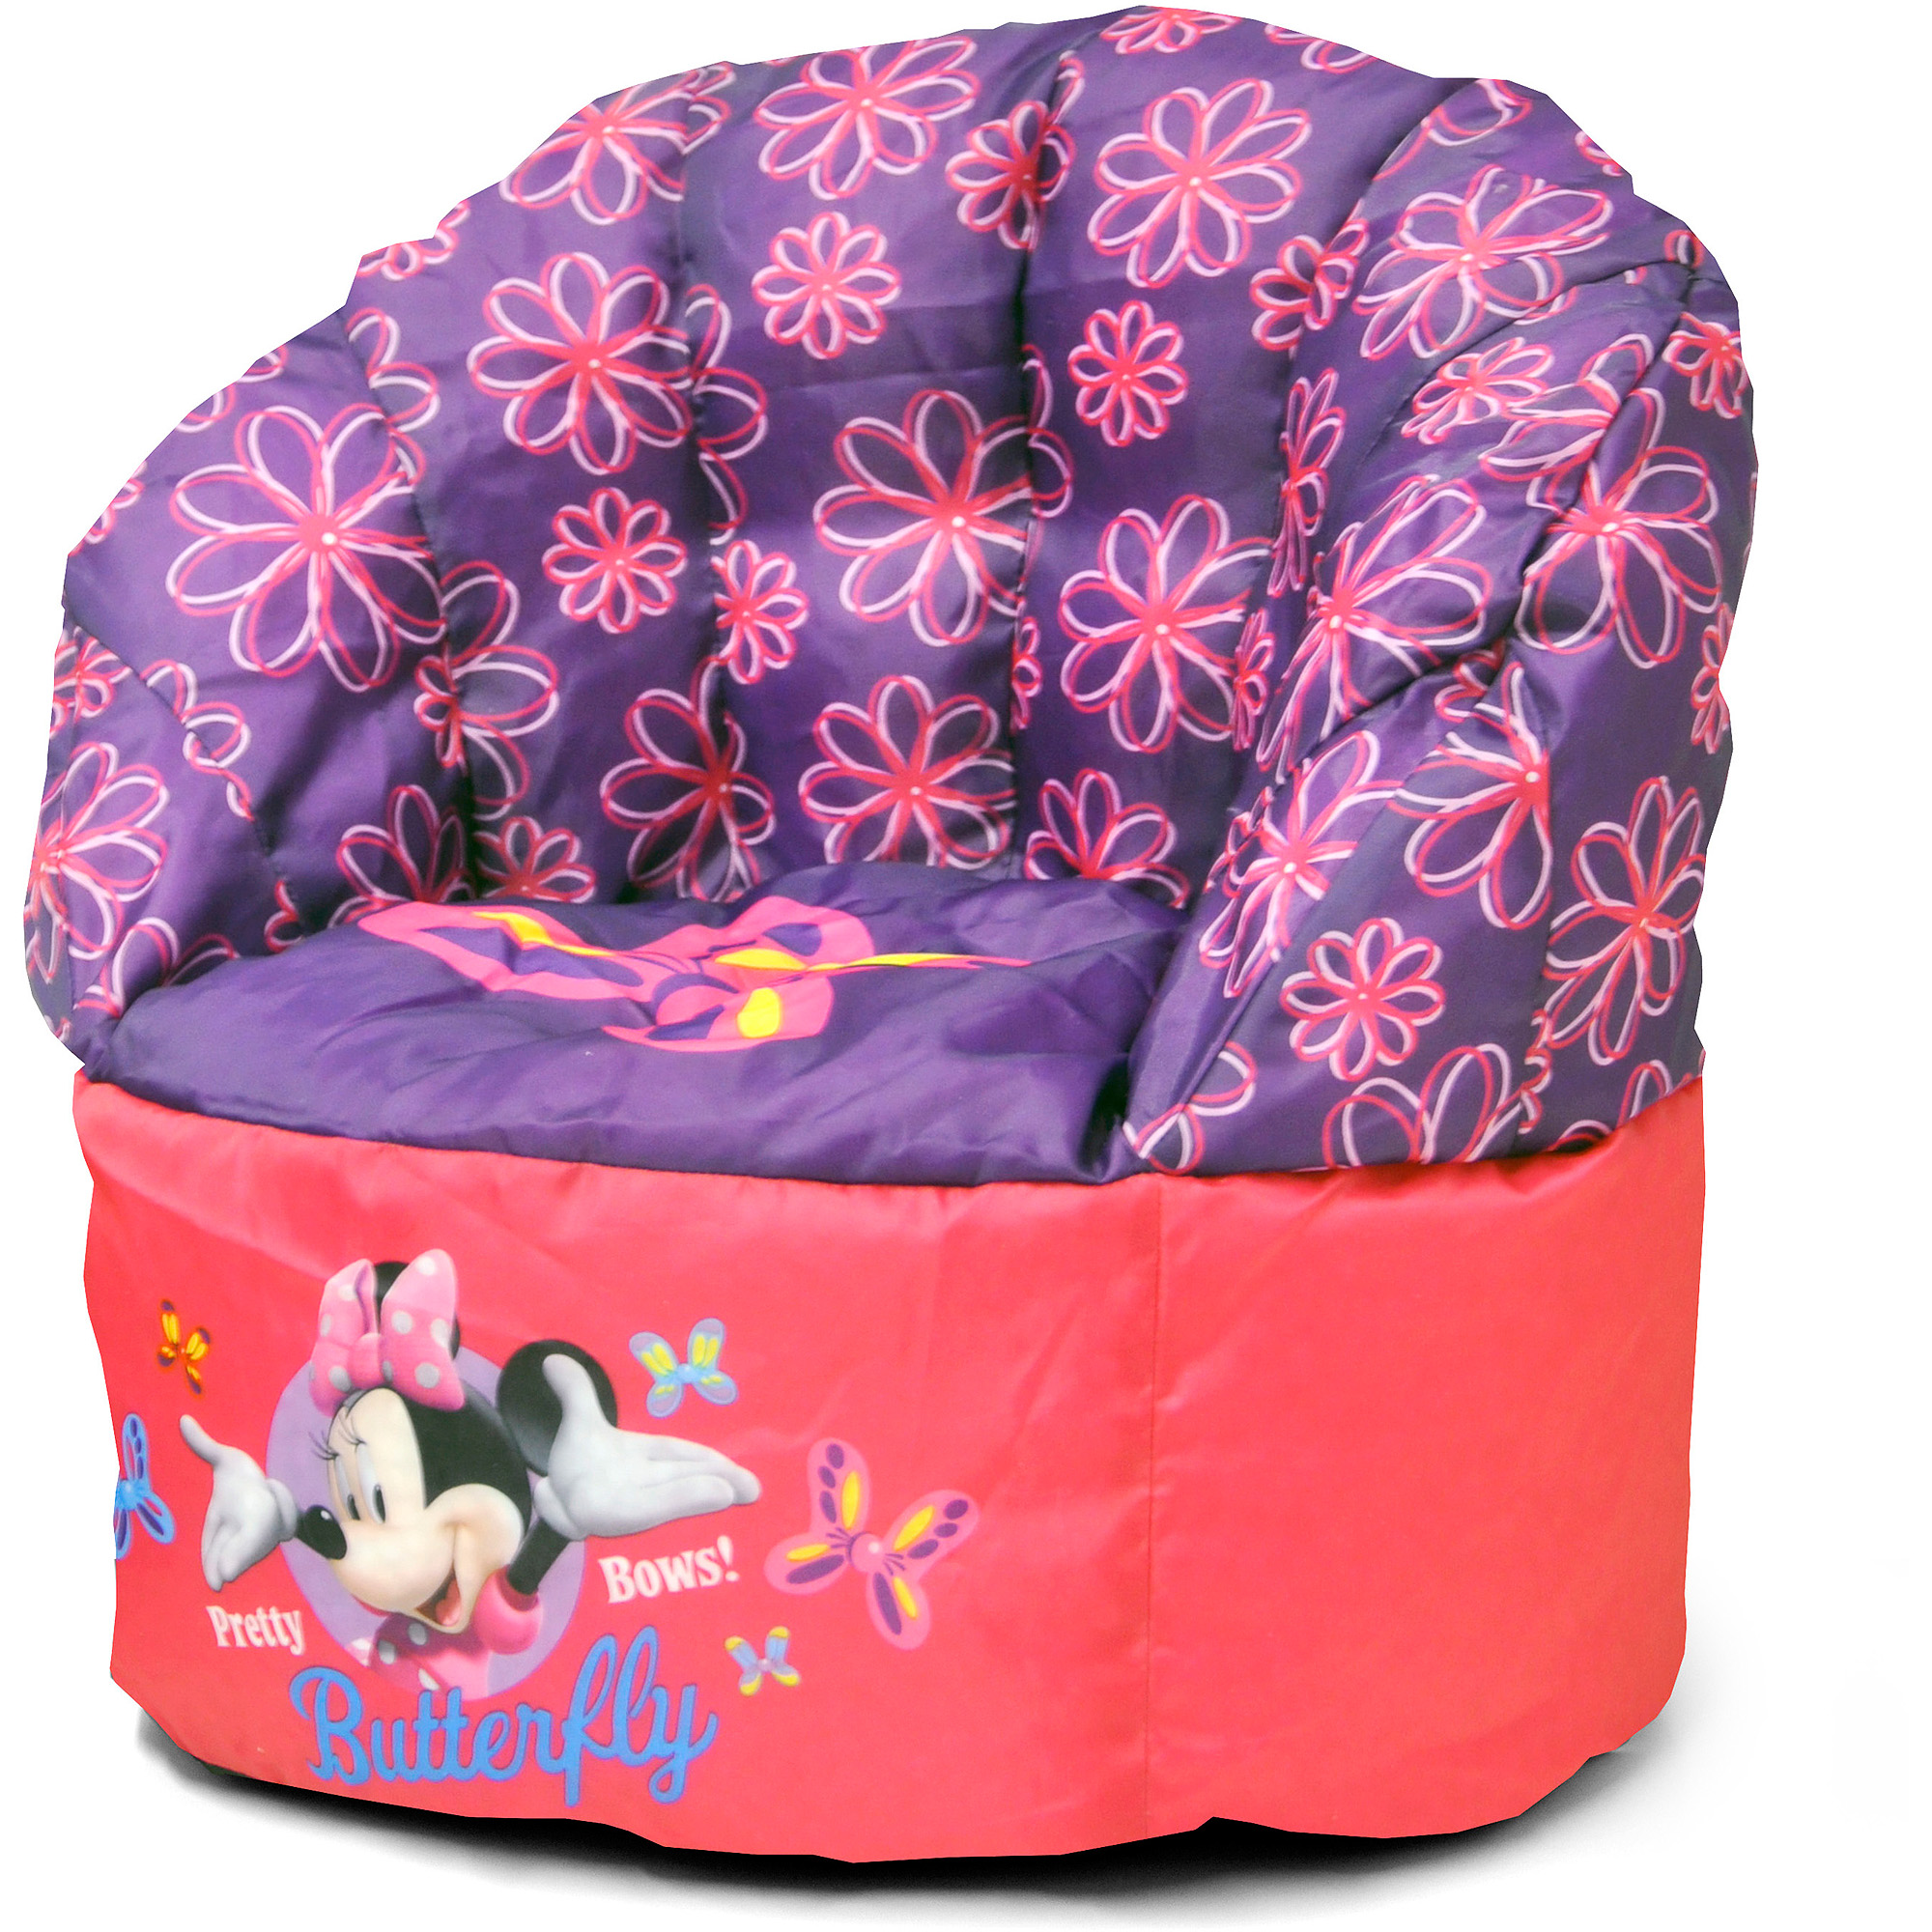 Disney Minnie Mouse Bean Bag Chair - image 1 of 2